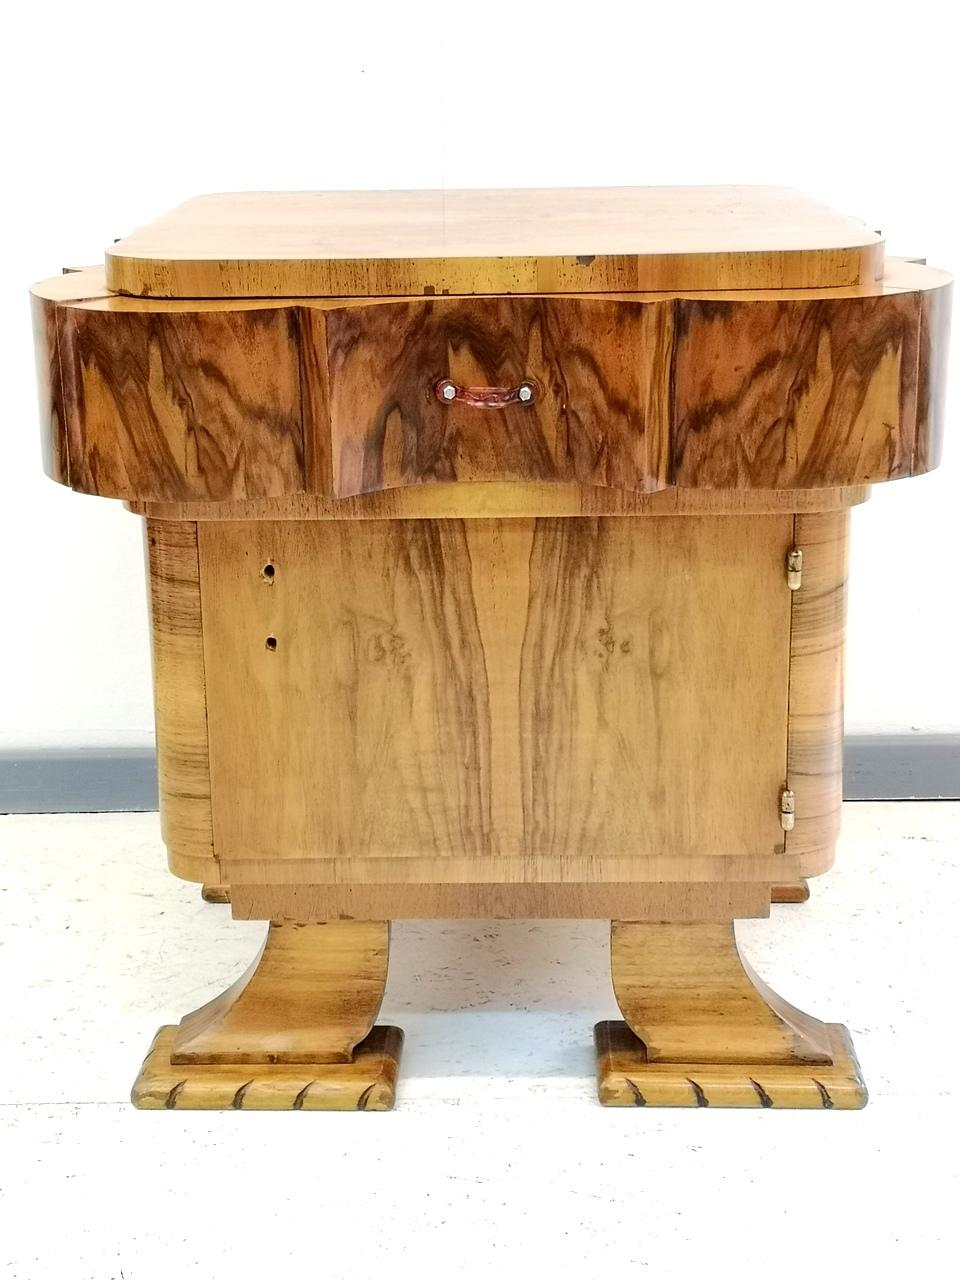 This stylish Art Deco piece features walnut wood veneer- French polished with shellac. It has one drawer and one door storage with a shelf. It has it's original bakelite handle, unfortunately one is missing. Generally it's in good condition, as